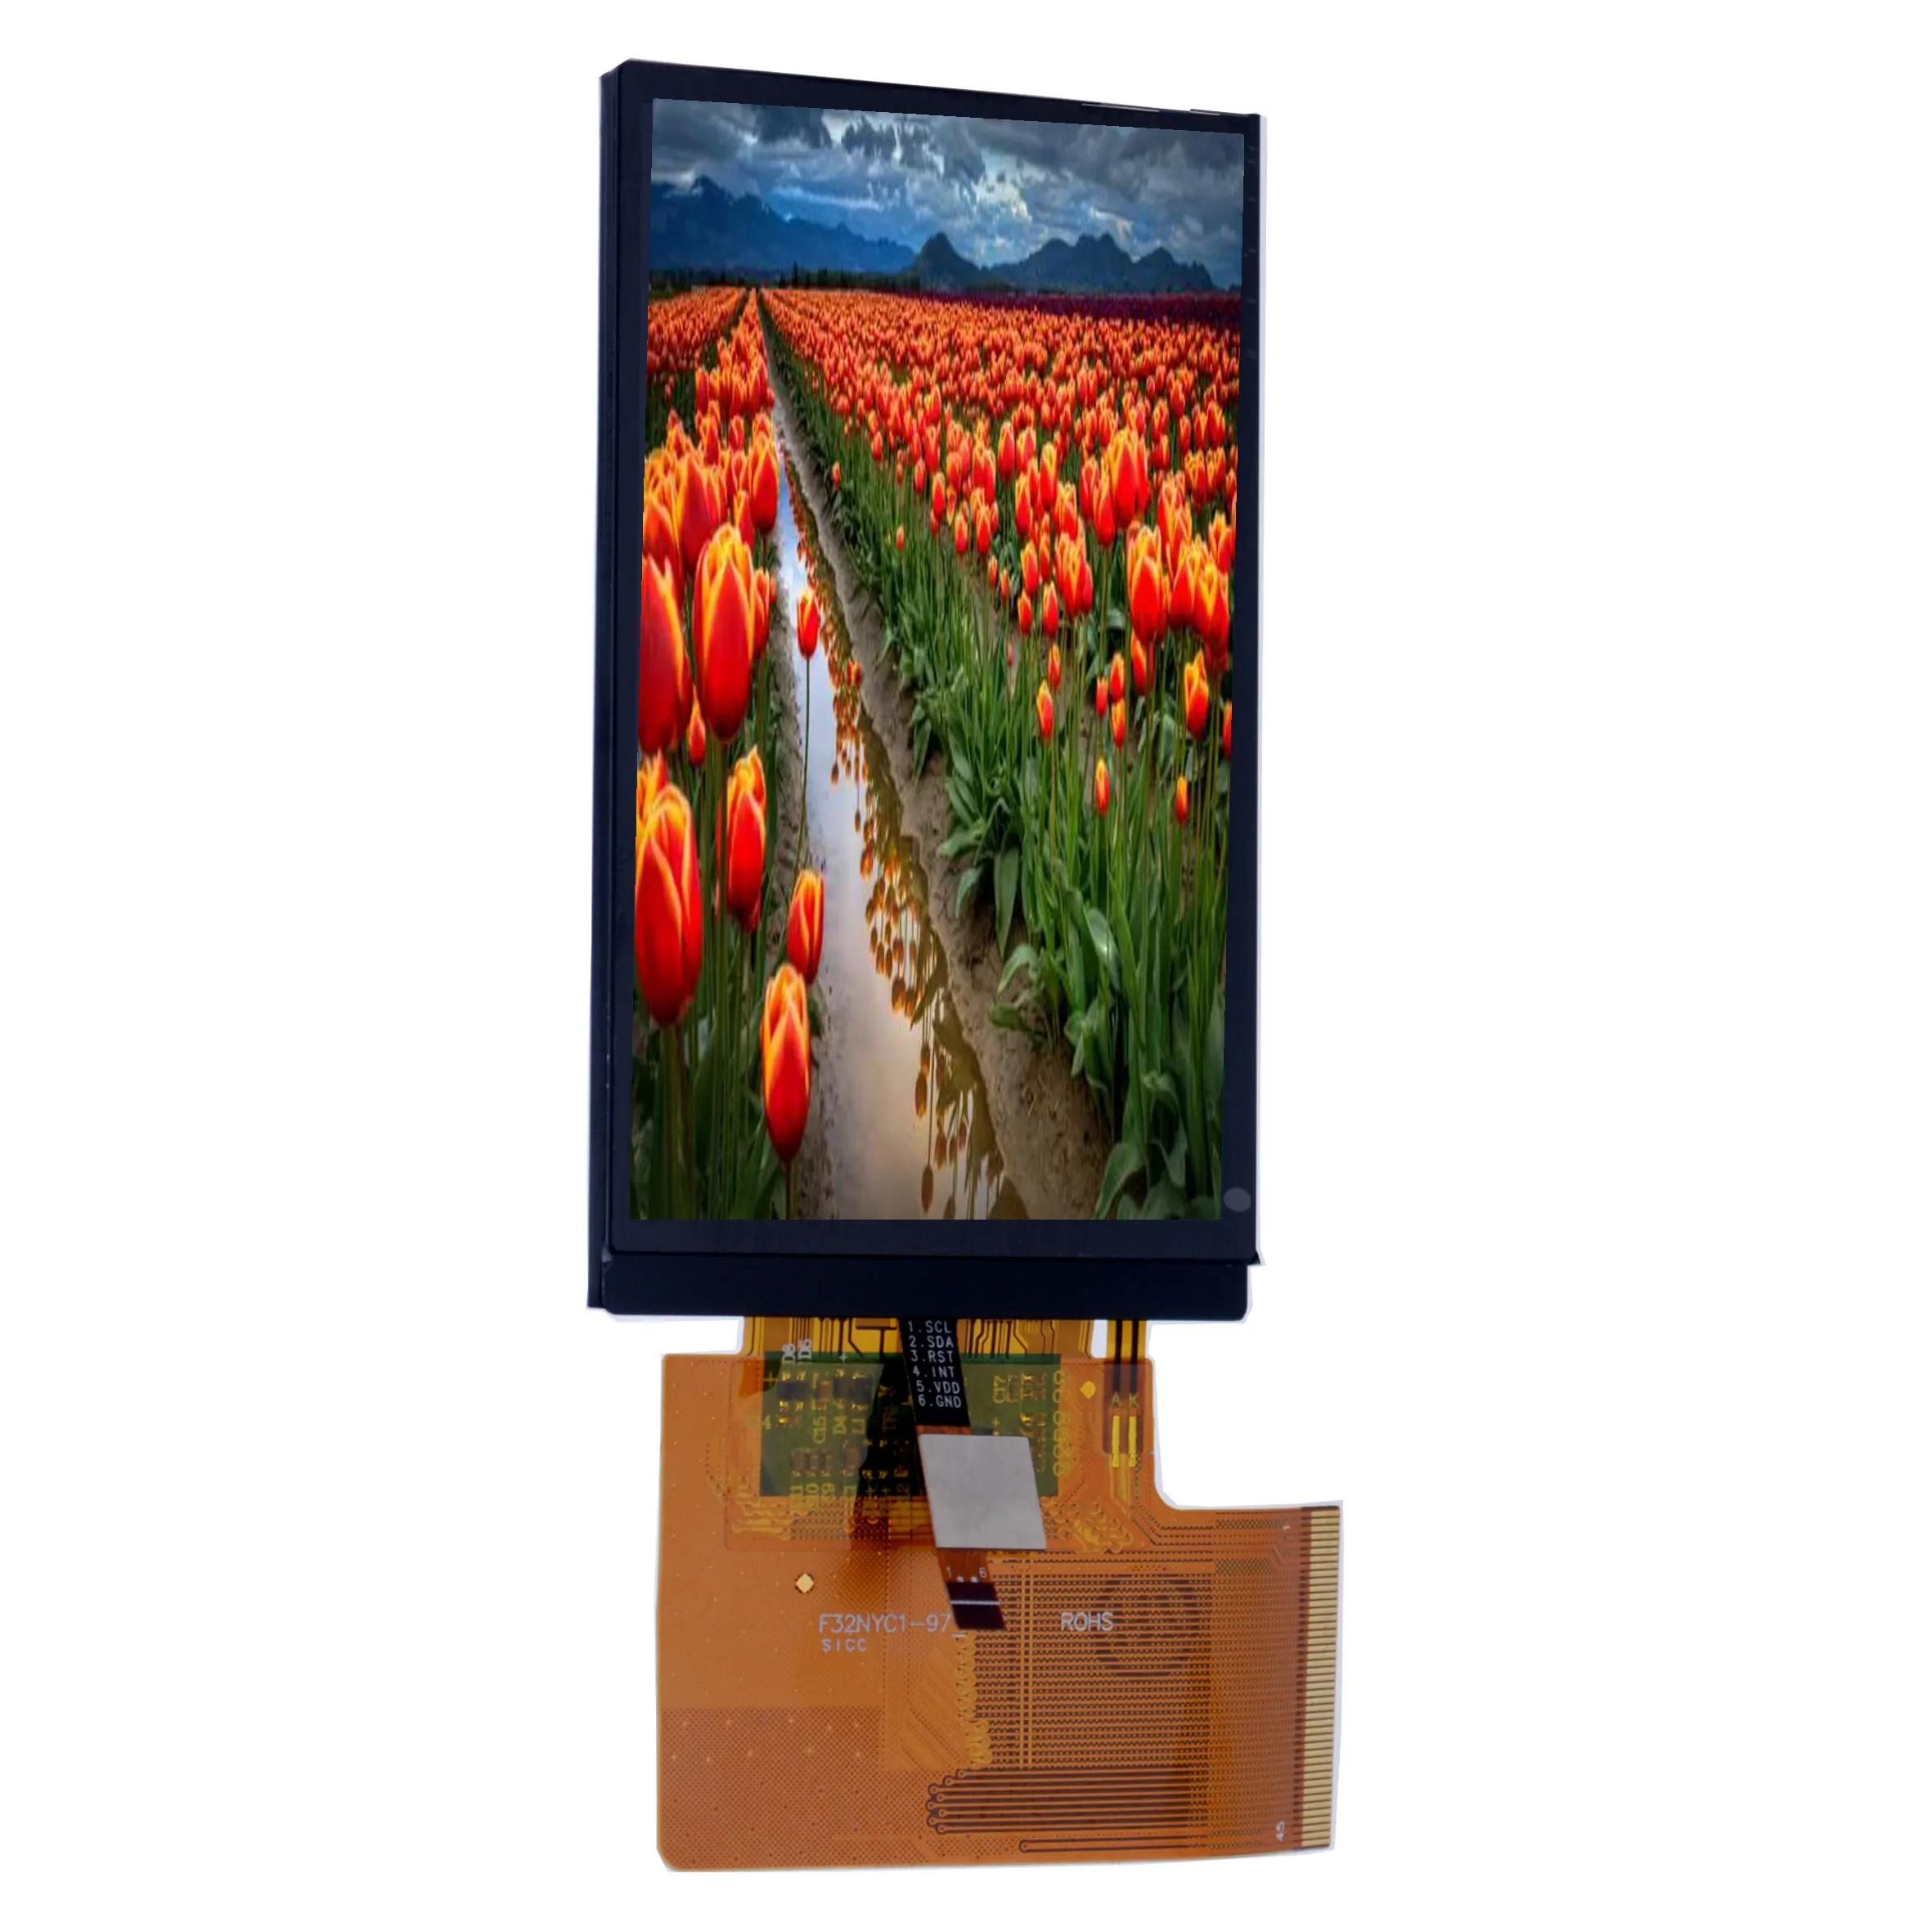 16.7M Full Colour 480X800 Resolution 3.2Inch Tft Lcd Display New Tft 3.2Inch Lcd Display With RGB Interface